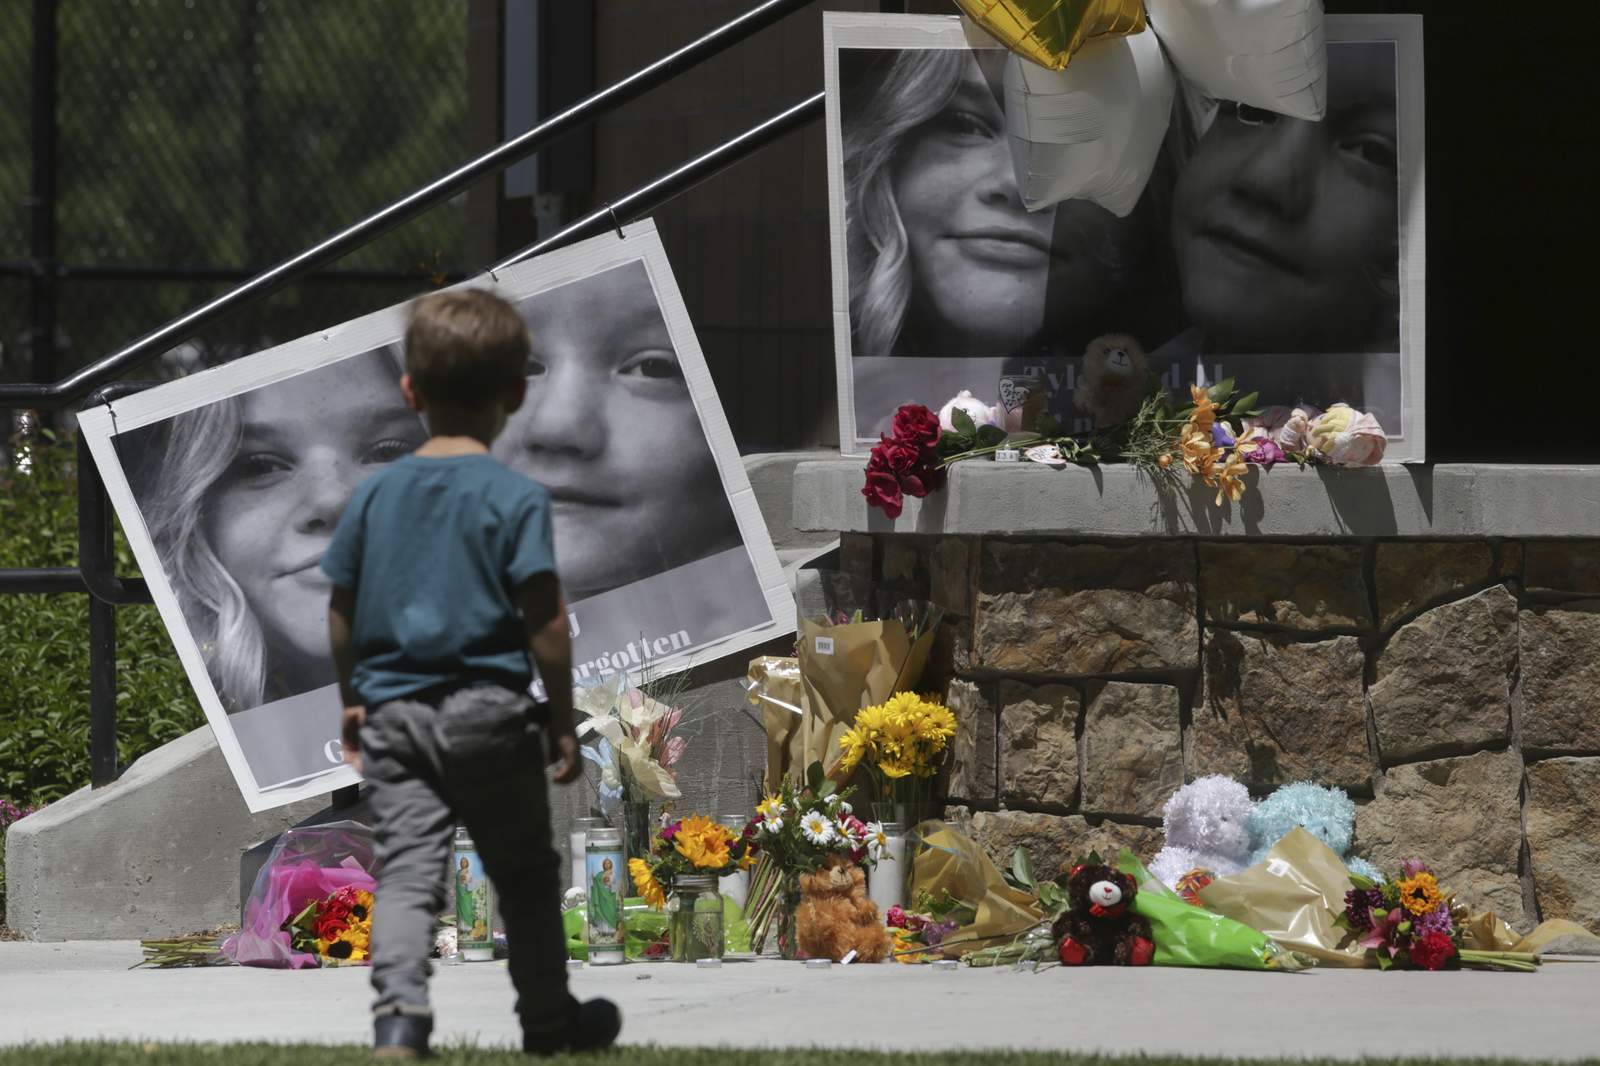 With the search for 2 kids at an end, a community mourns